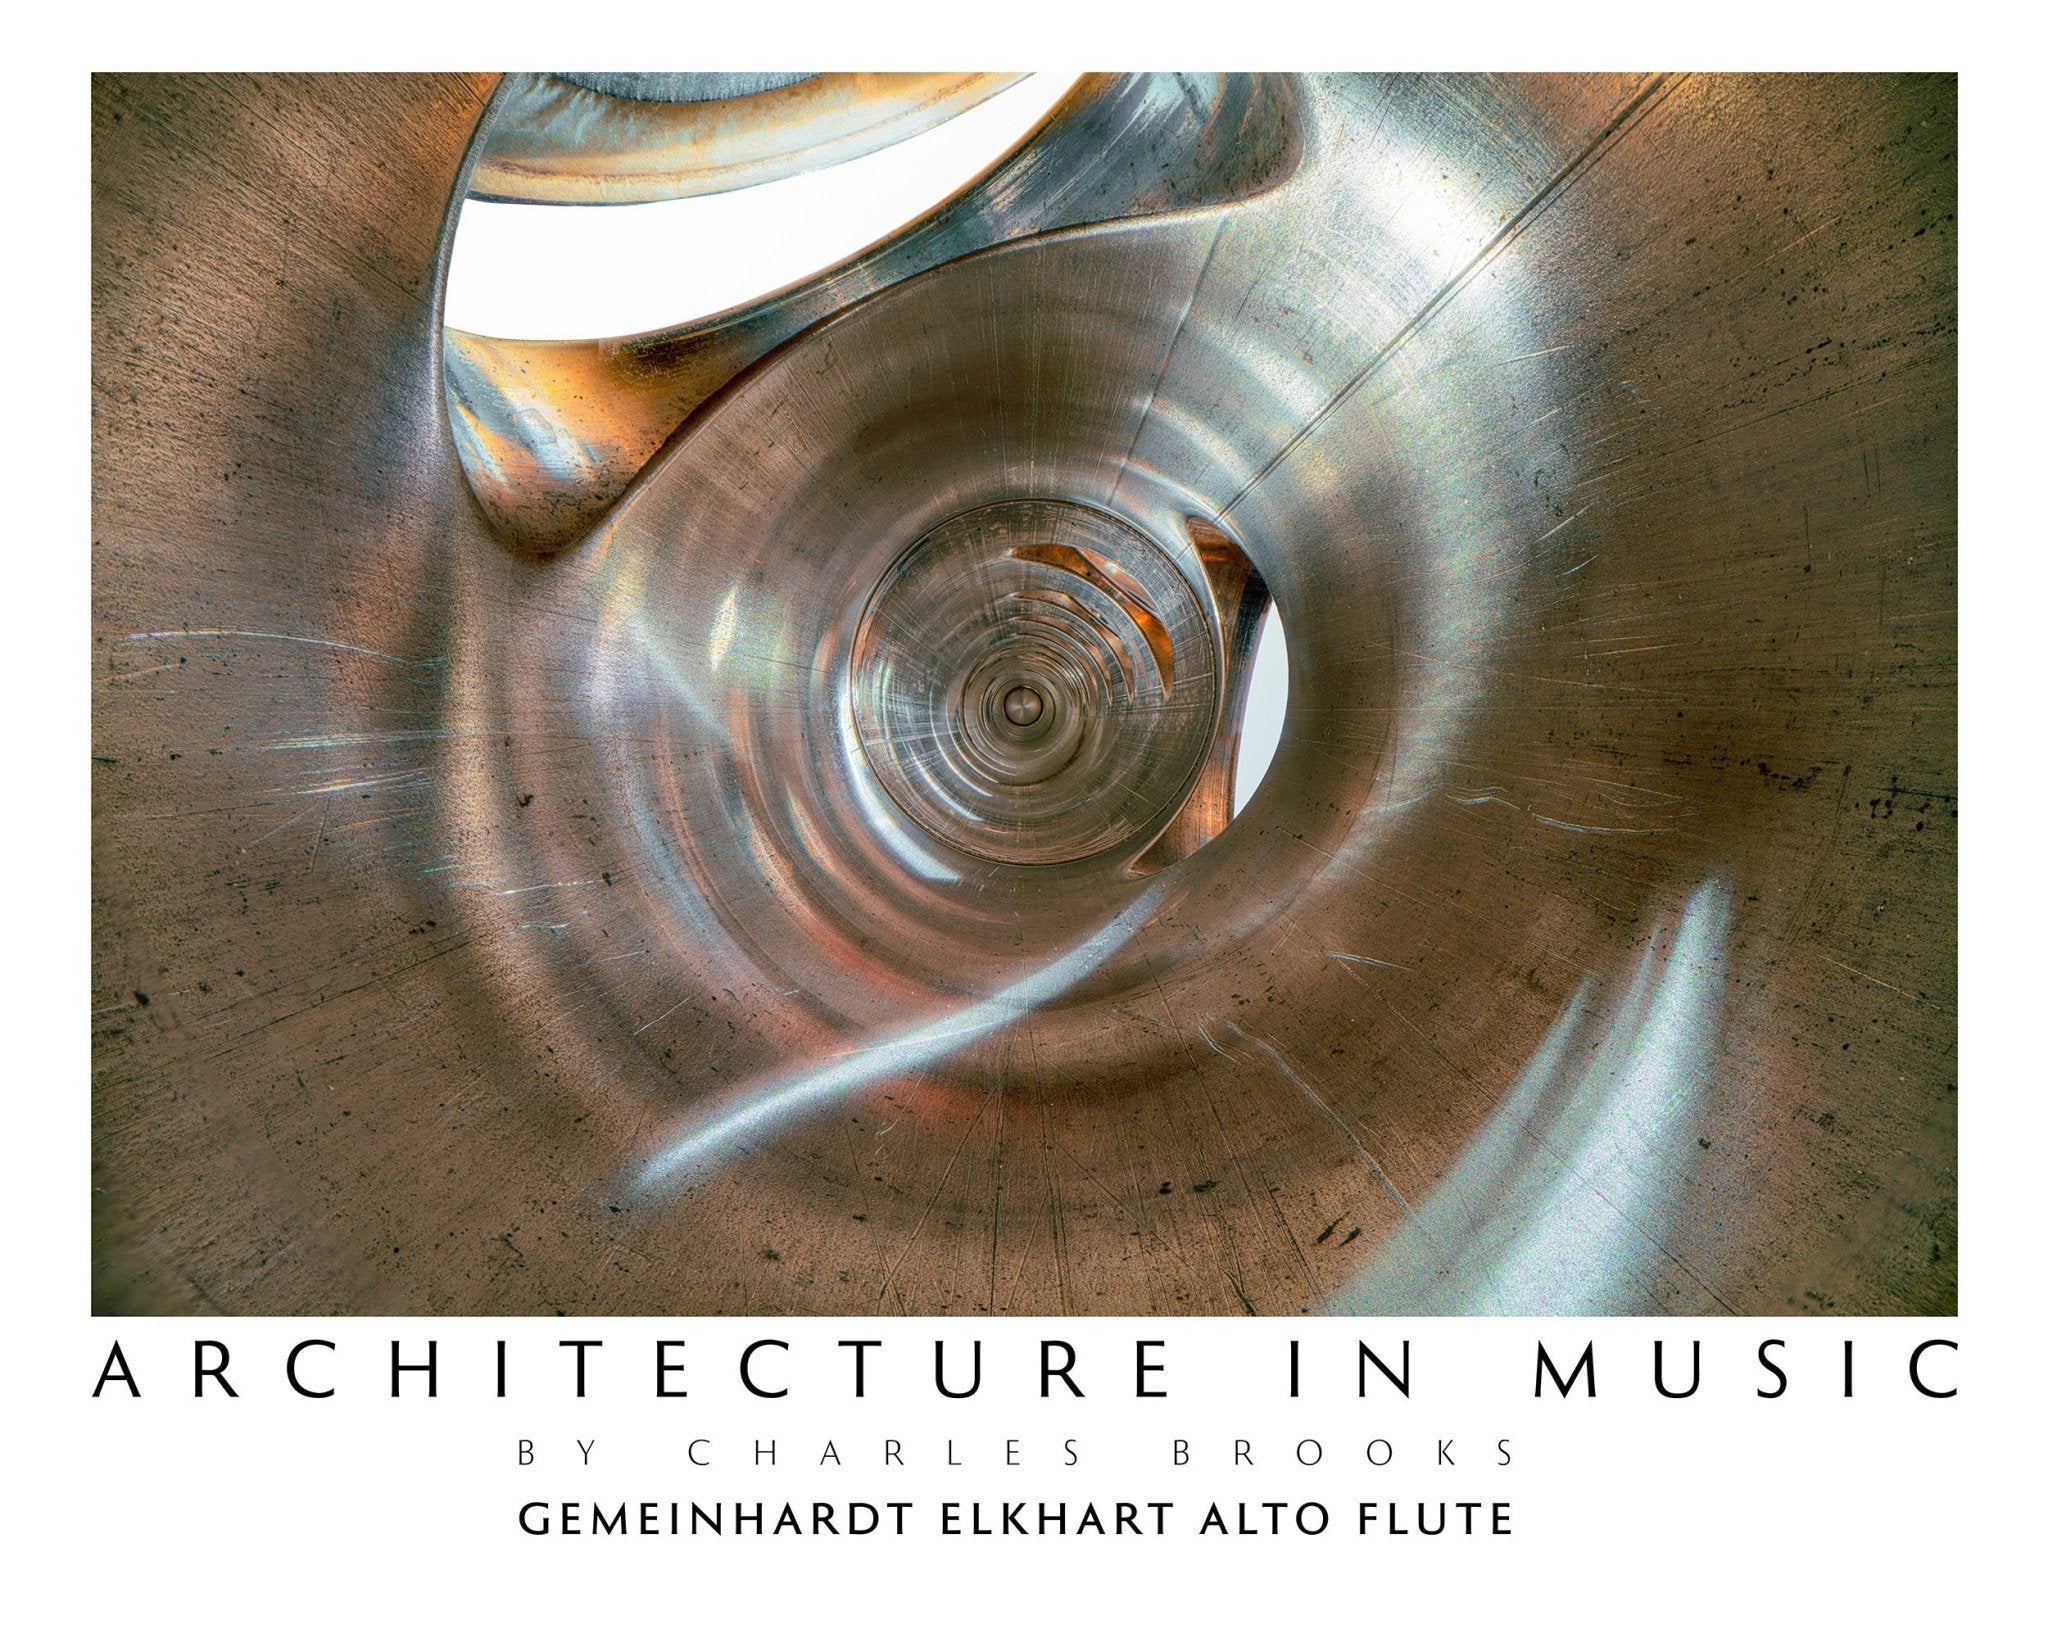 Photo of Alto Flute. High Quality Poster. - Giclée Poster Print - Architecture In Music